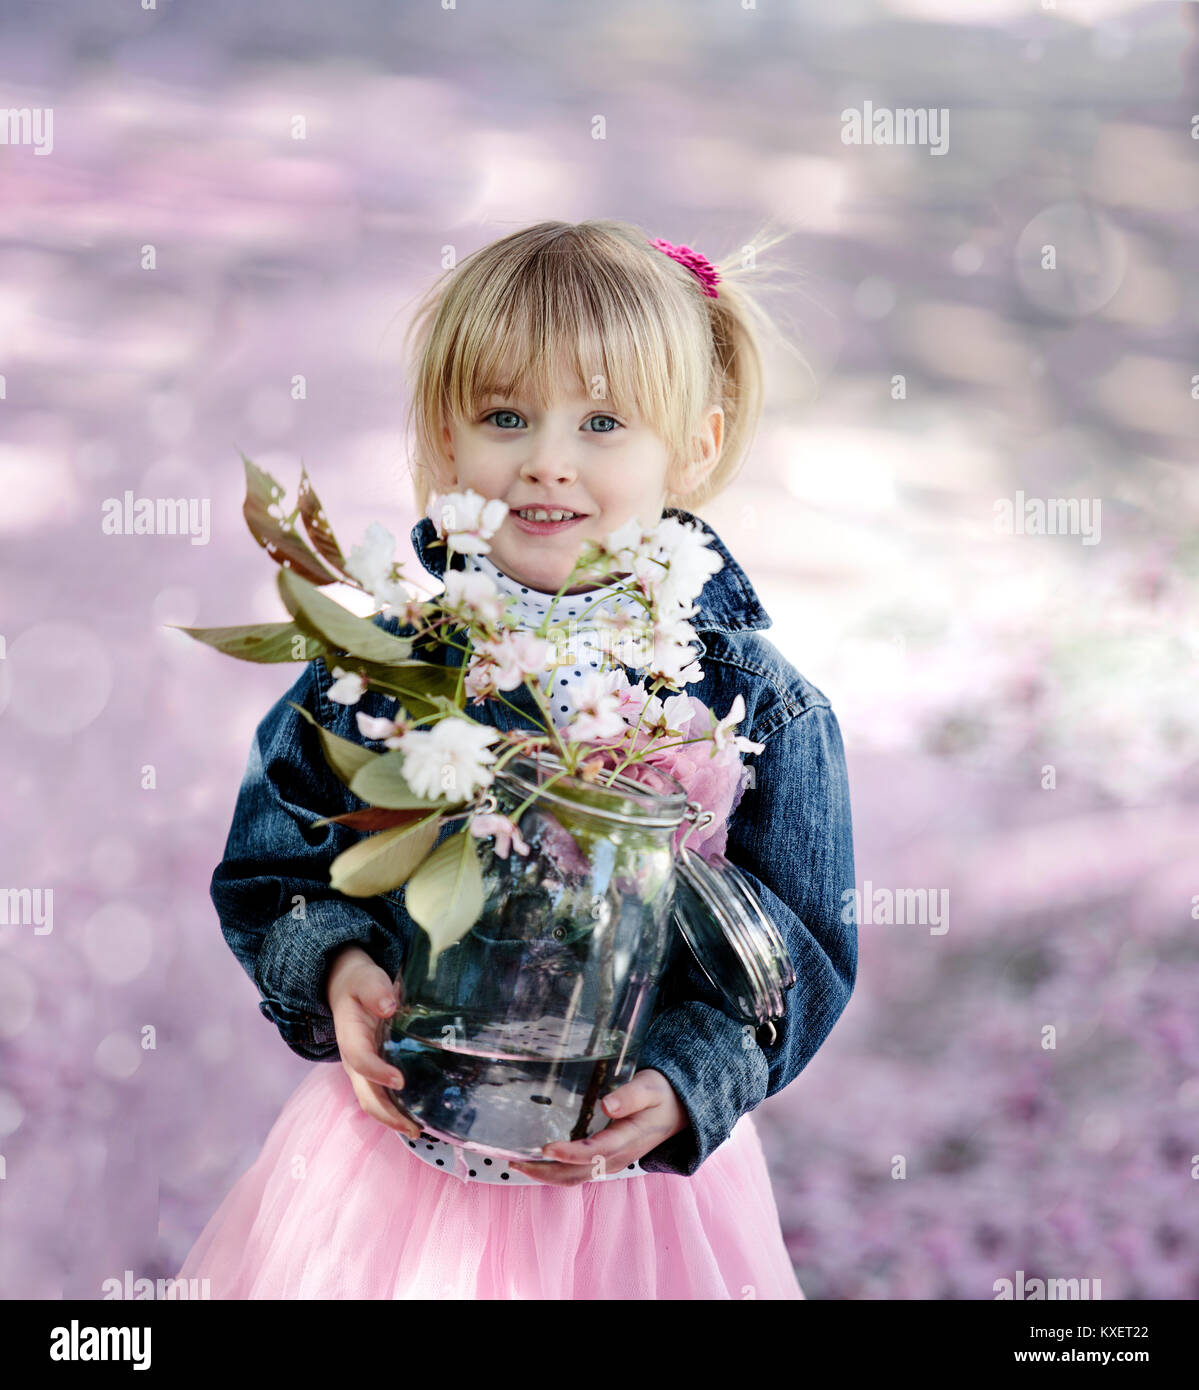 Portrait of a Girl and Cherry Tree Flowers in Spring Stock Photo